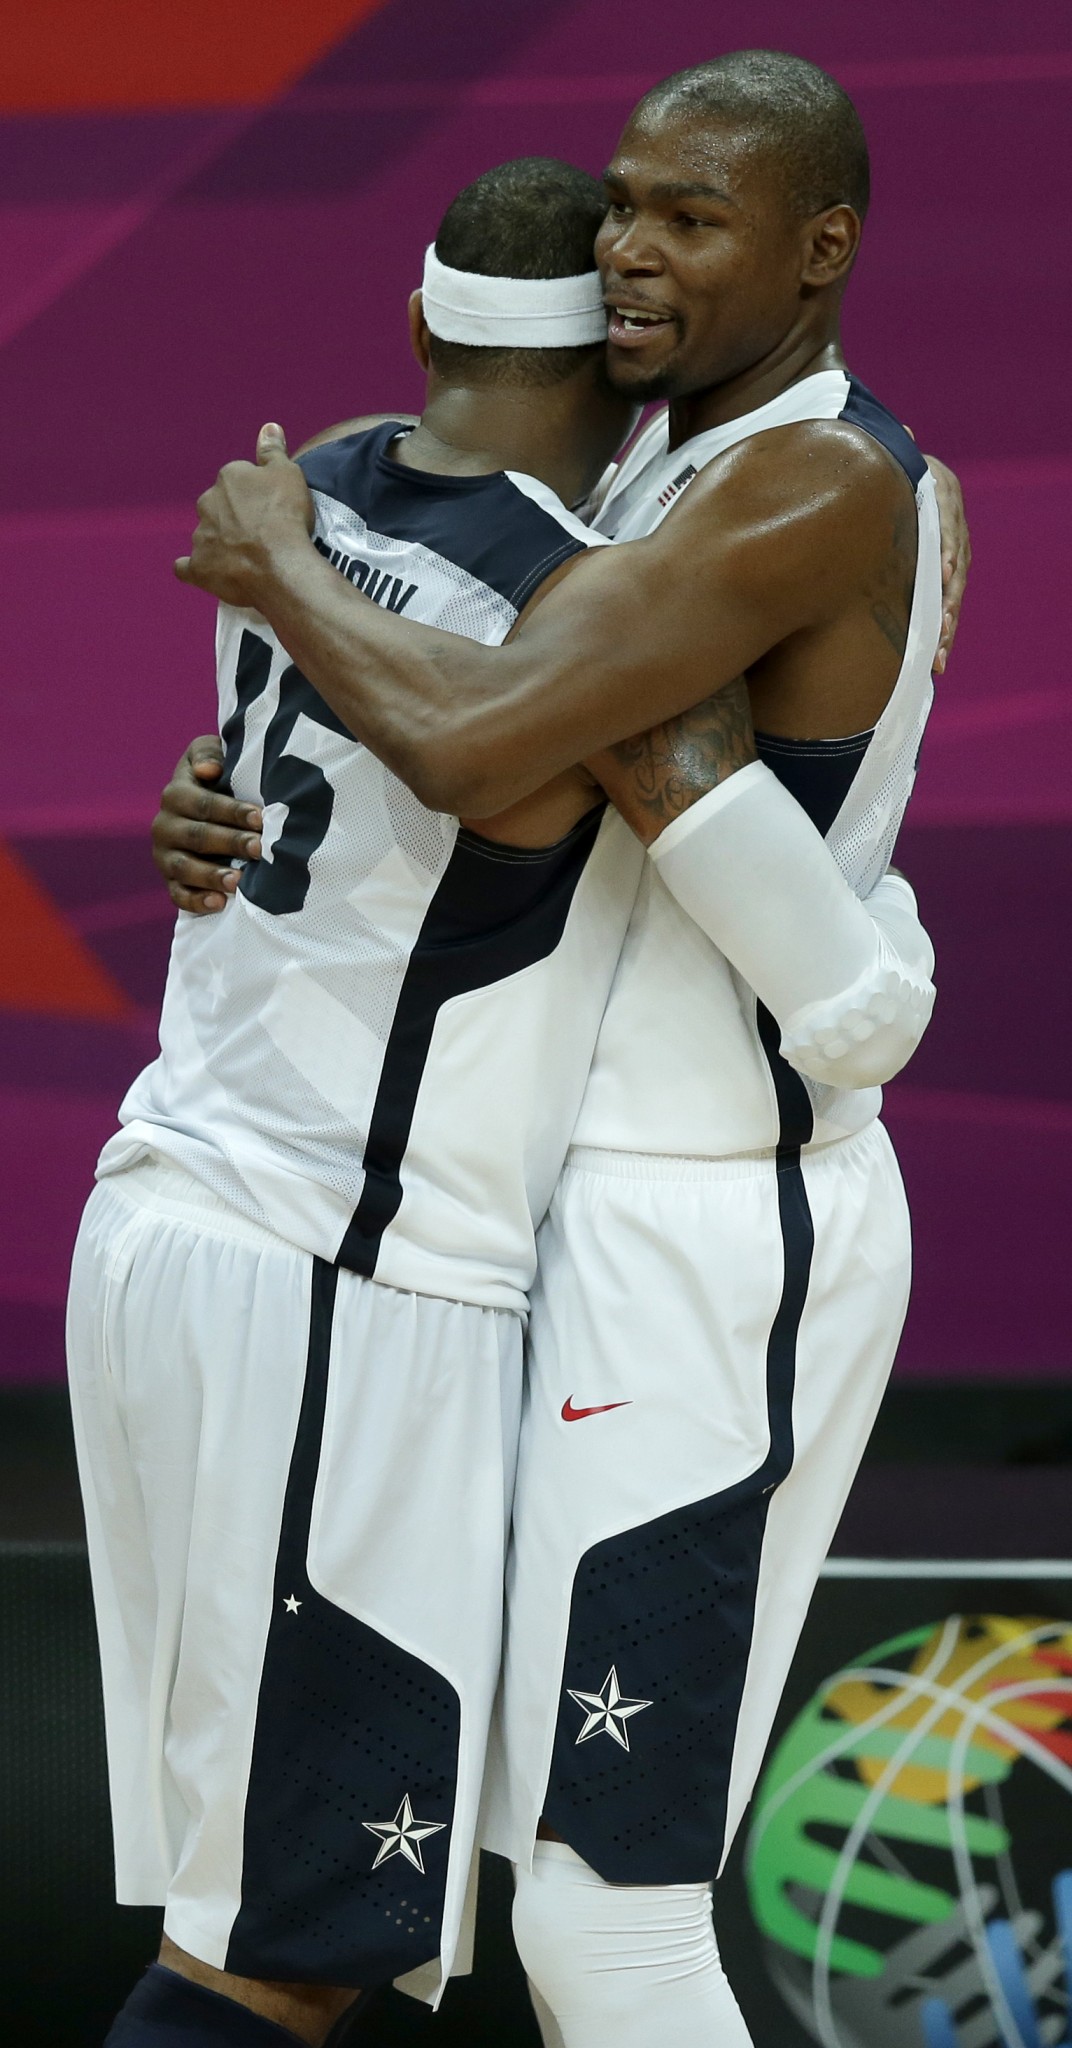 Kevin Durant accepts the hug of U.S. teammate Carmelo Anthony in 2012. (AP/Charlie Riedel)